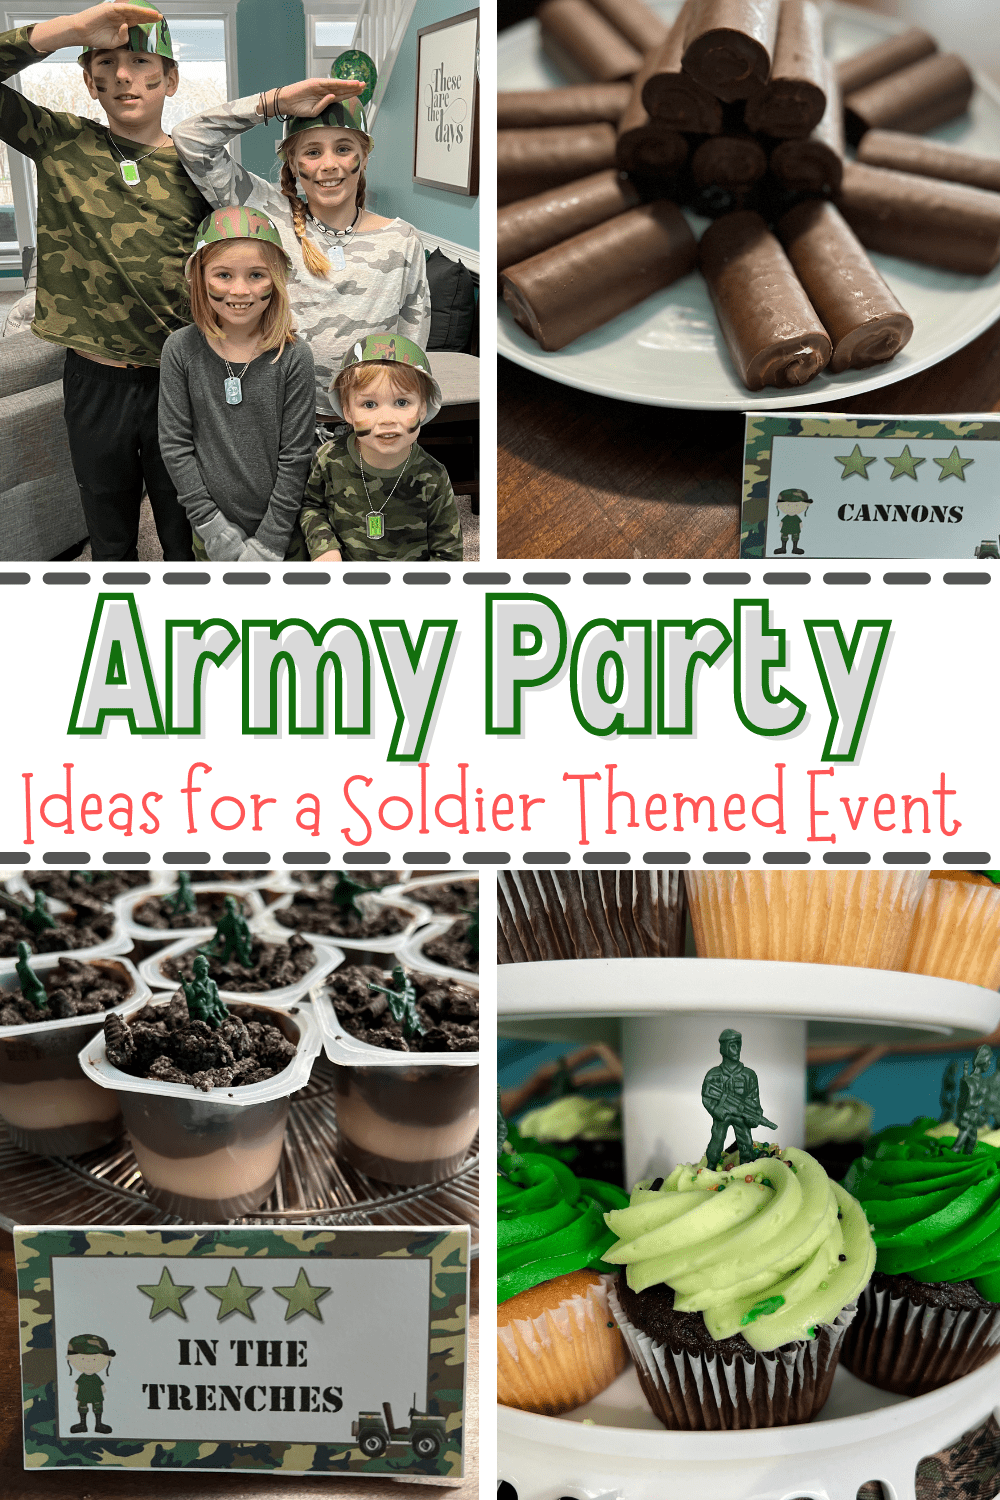 Army Party Ideas perfect for your next DIY army themed birthday party or military themed party event fit for your little soldier